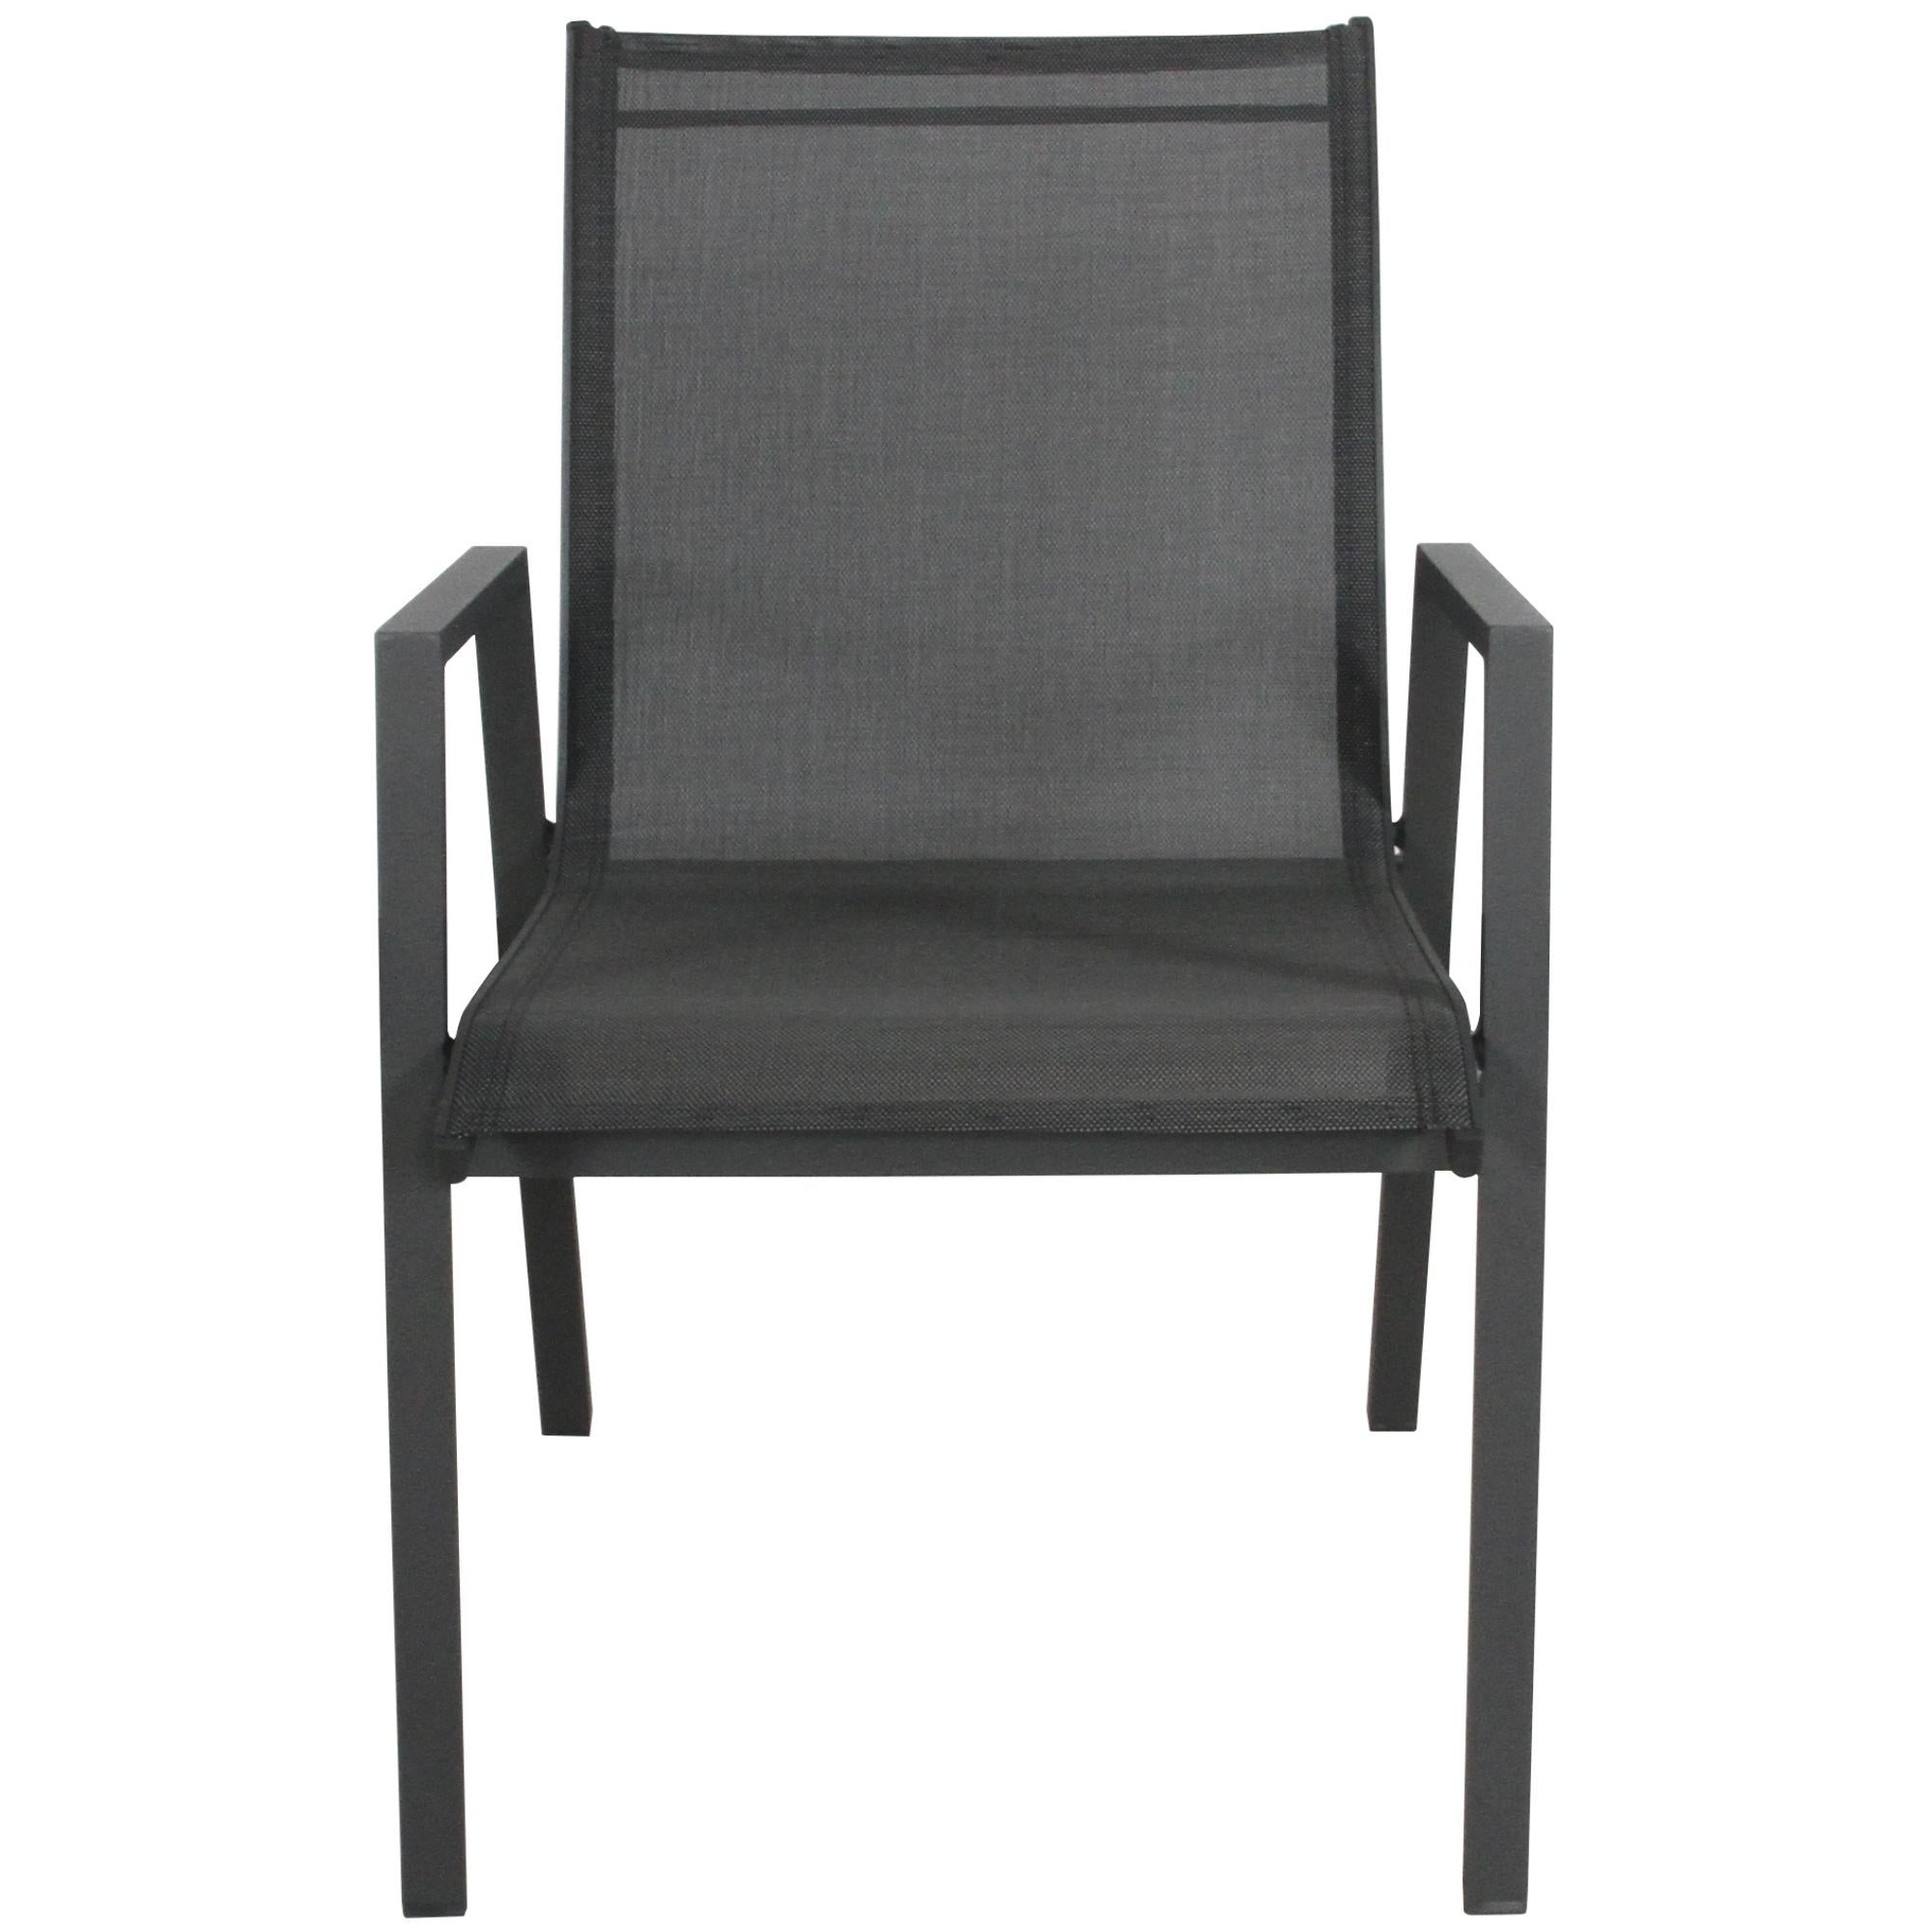 6pc Aluminium Outdoor Dining Chairs, Stackable, Charcoal